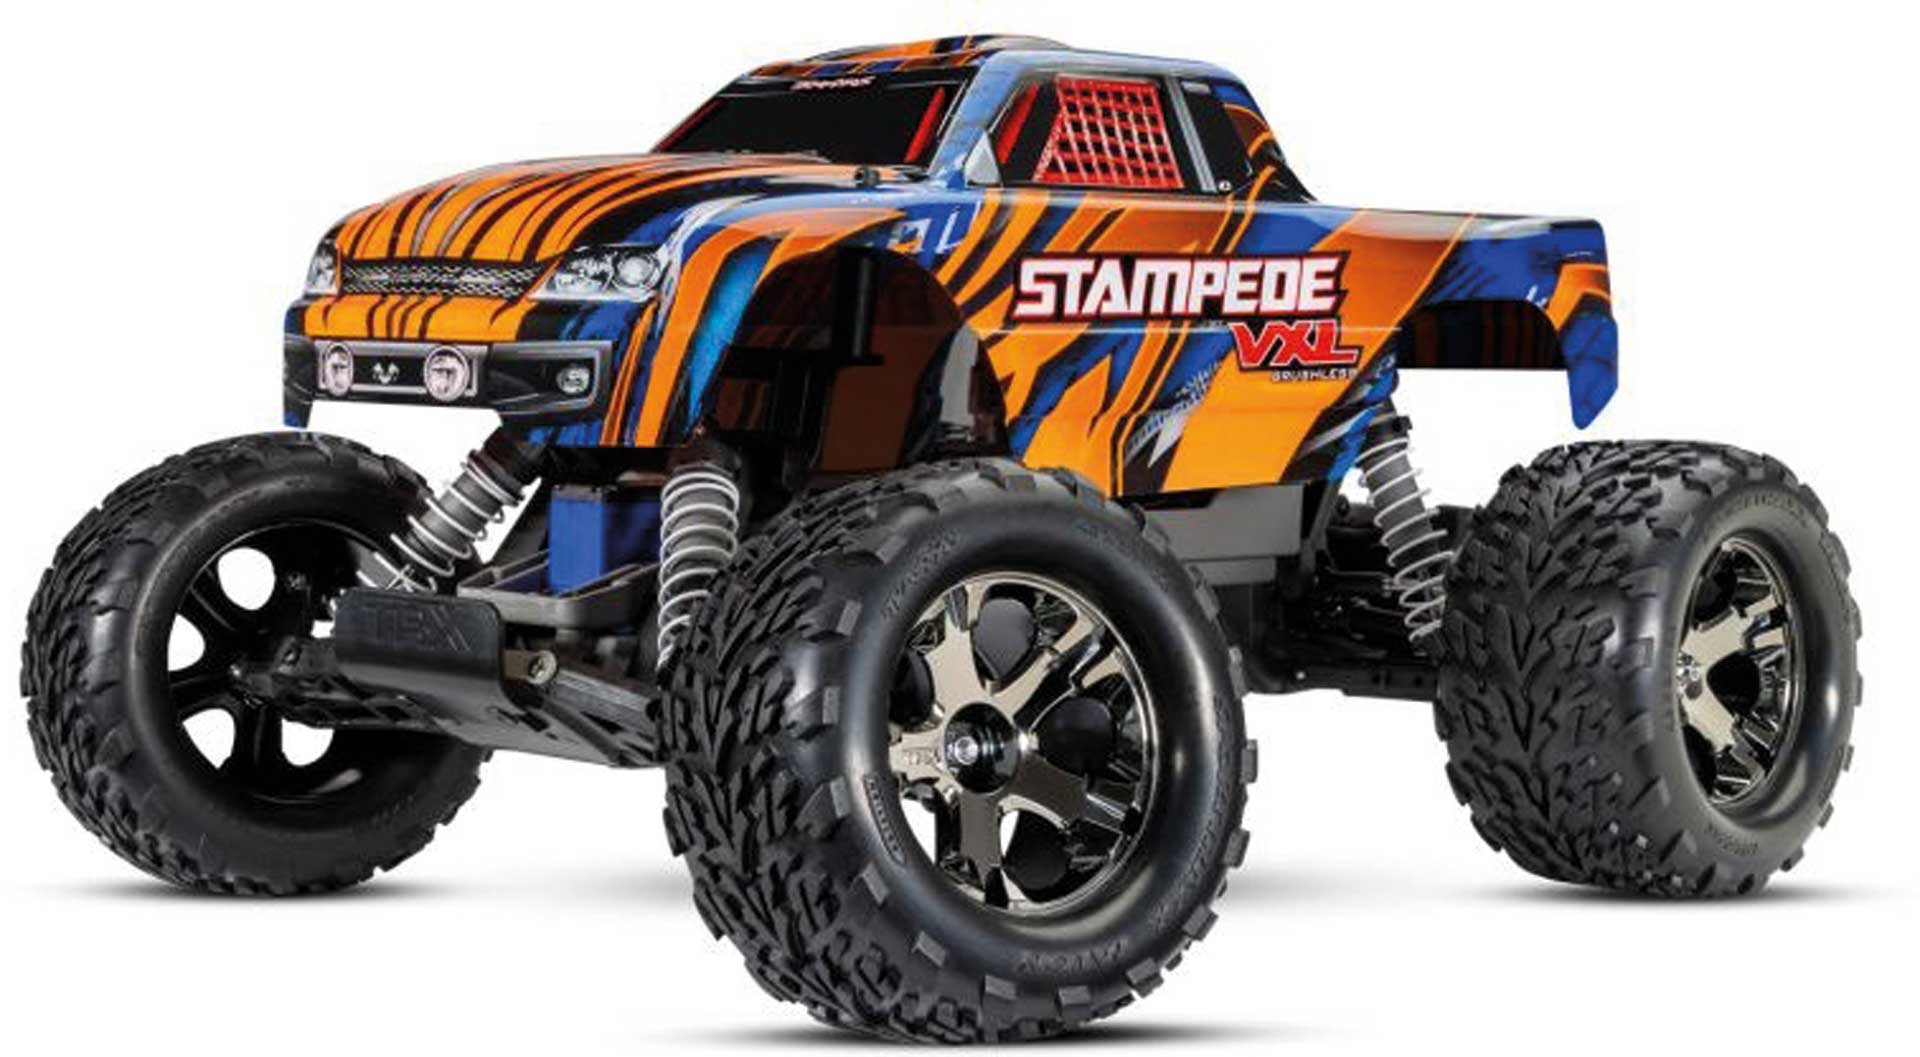 TRAXXAS STAMPEDE VXL ORANGE BL 2.4GHZ +TSM sans accu /chargeur  1/10 2WD MONSTER TRUCK BRUSHLESS